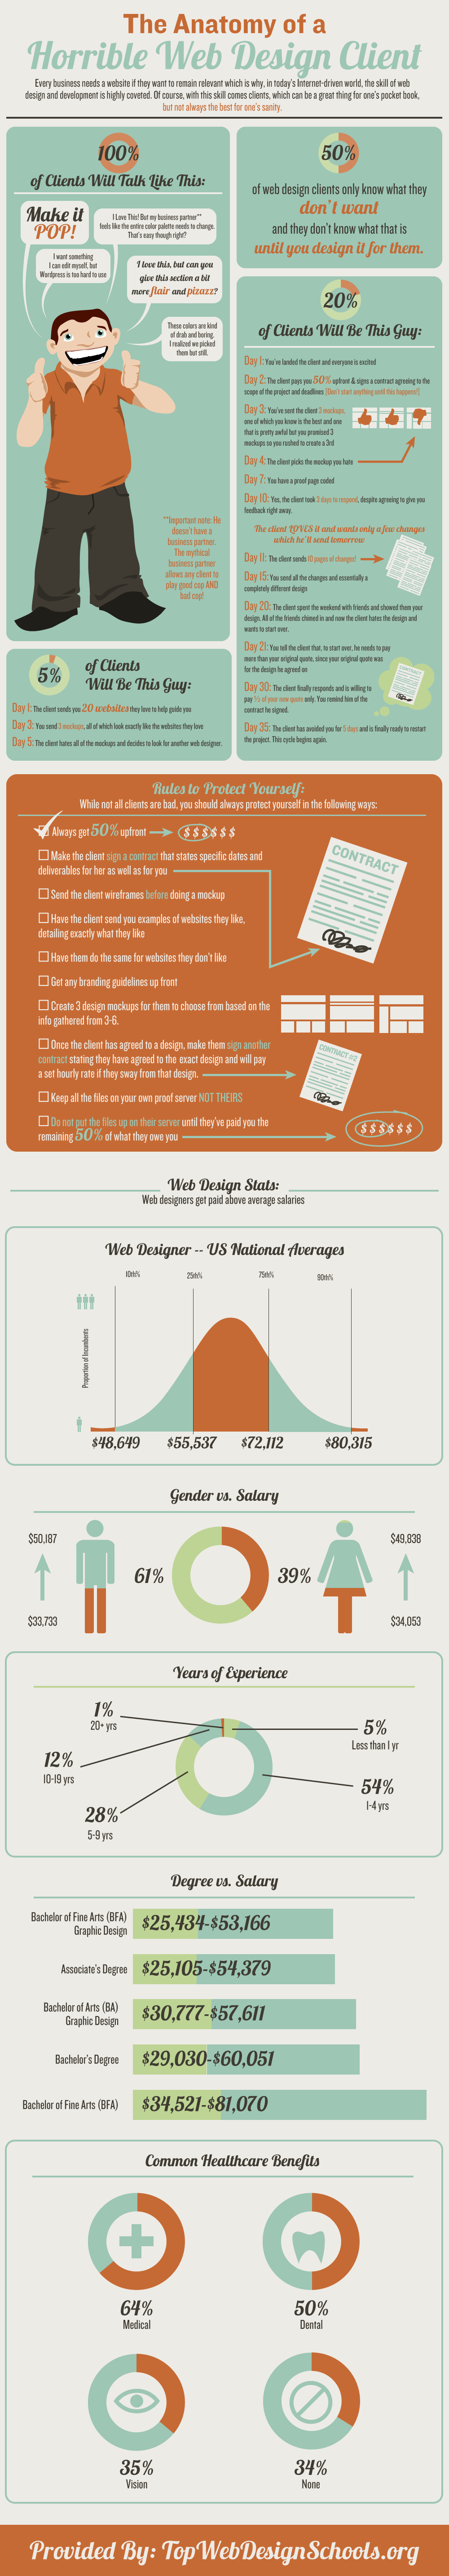 The Anatomy of a Horrible Web Design Client Infographic